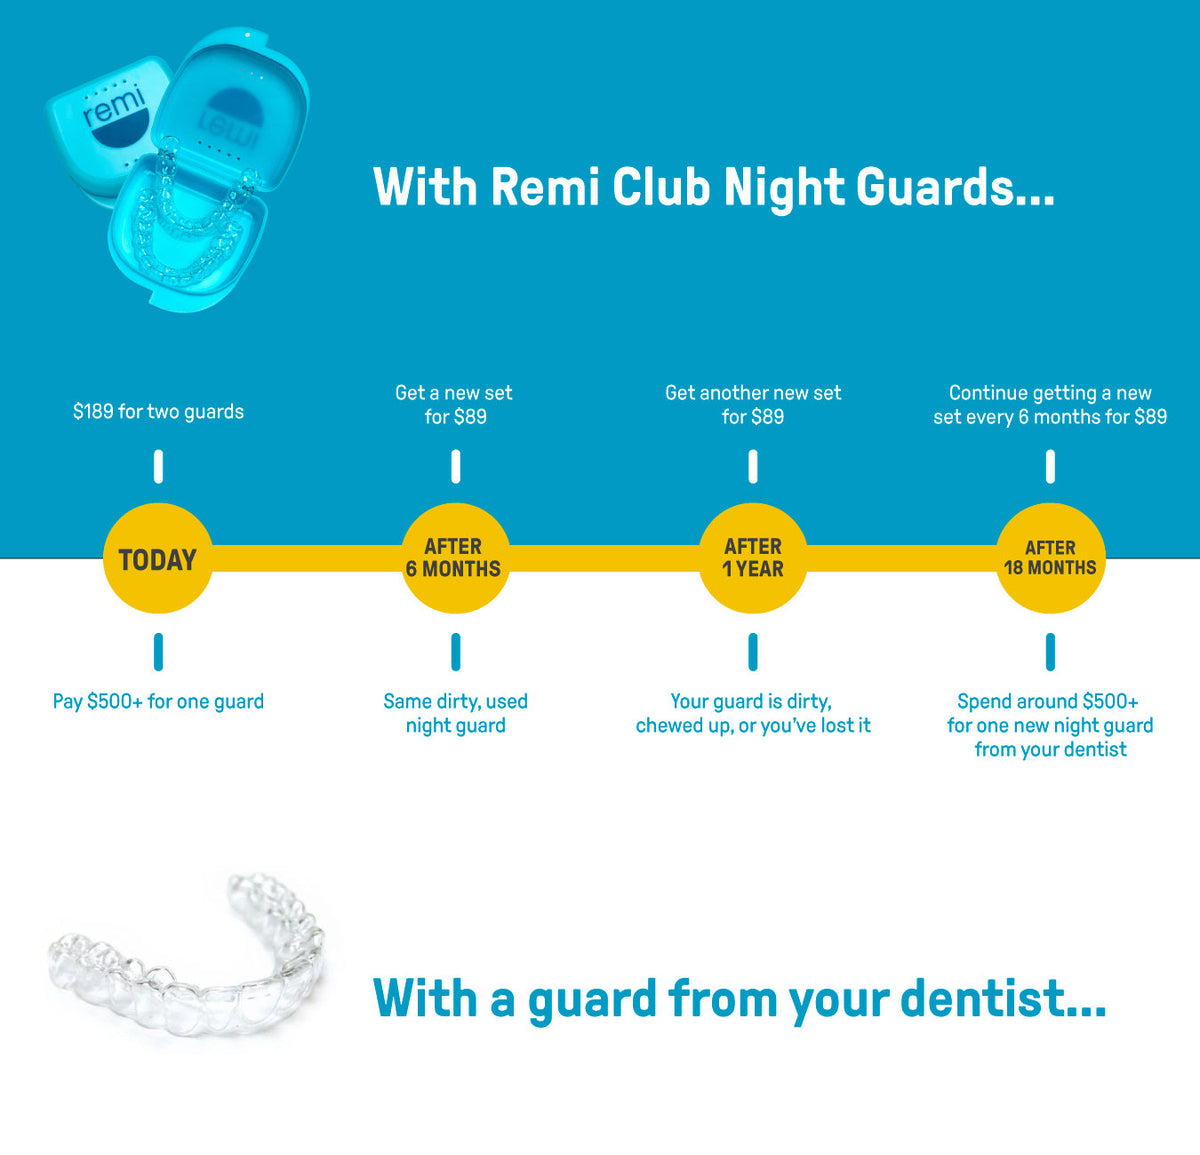 Advertisement for Custom Night Guards featuring dental-grade quality, a custom night guard, and a three-tiered pricing plan over 18 months, with text and icons explaining the cost over time.